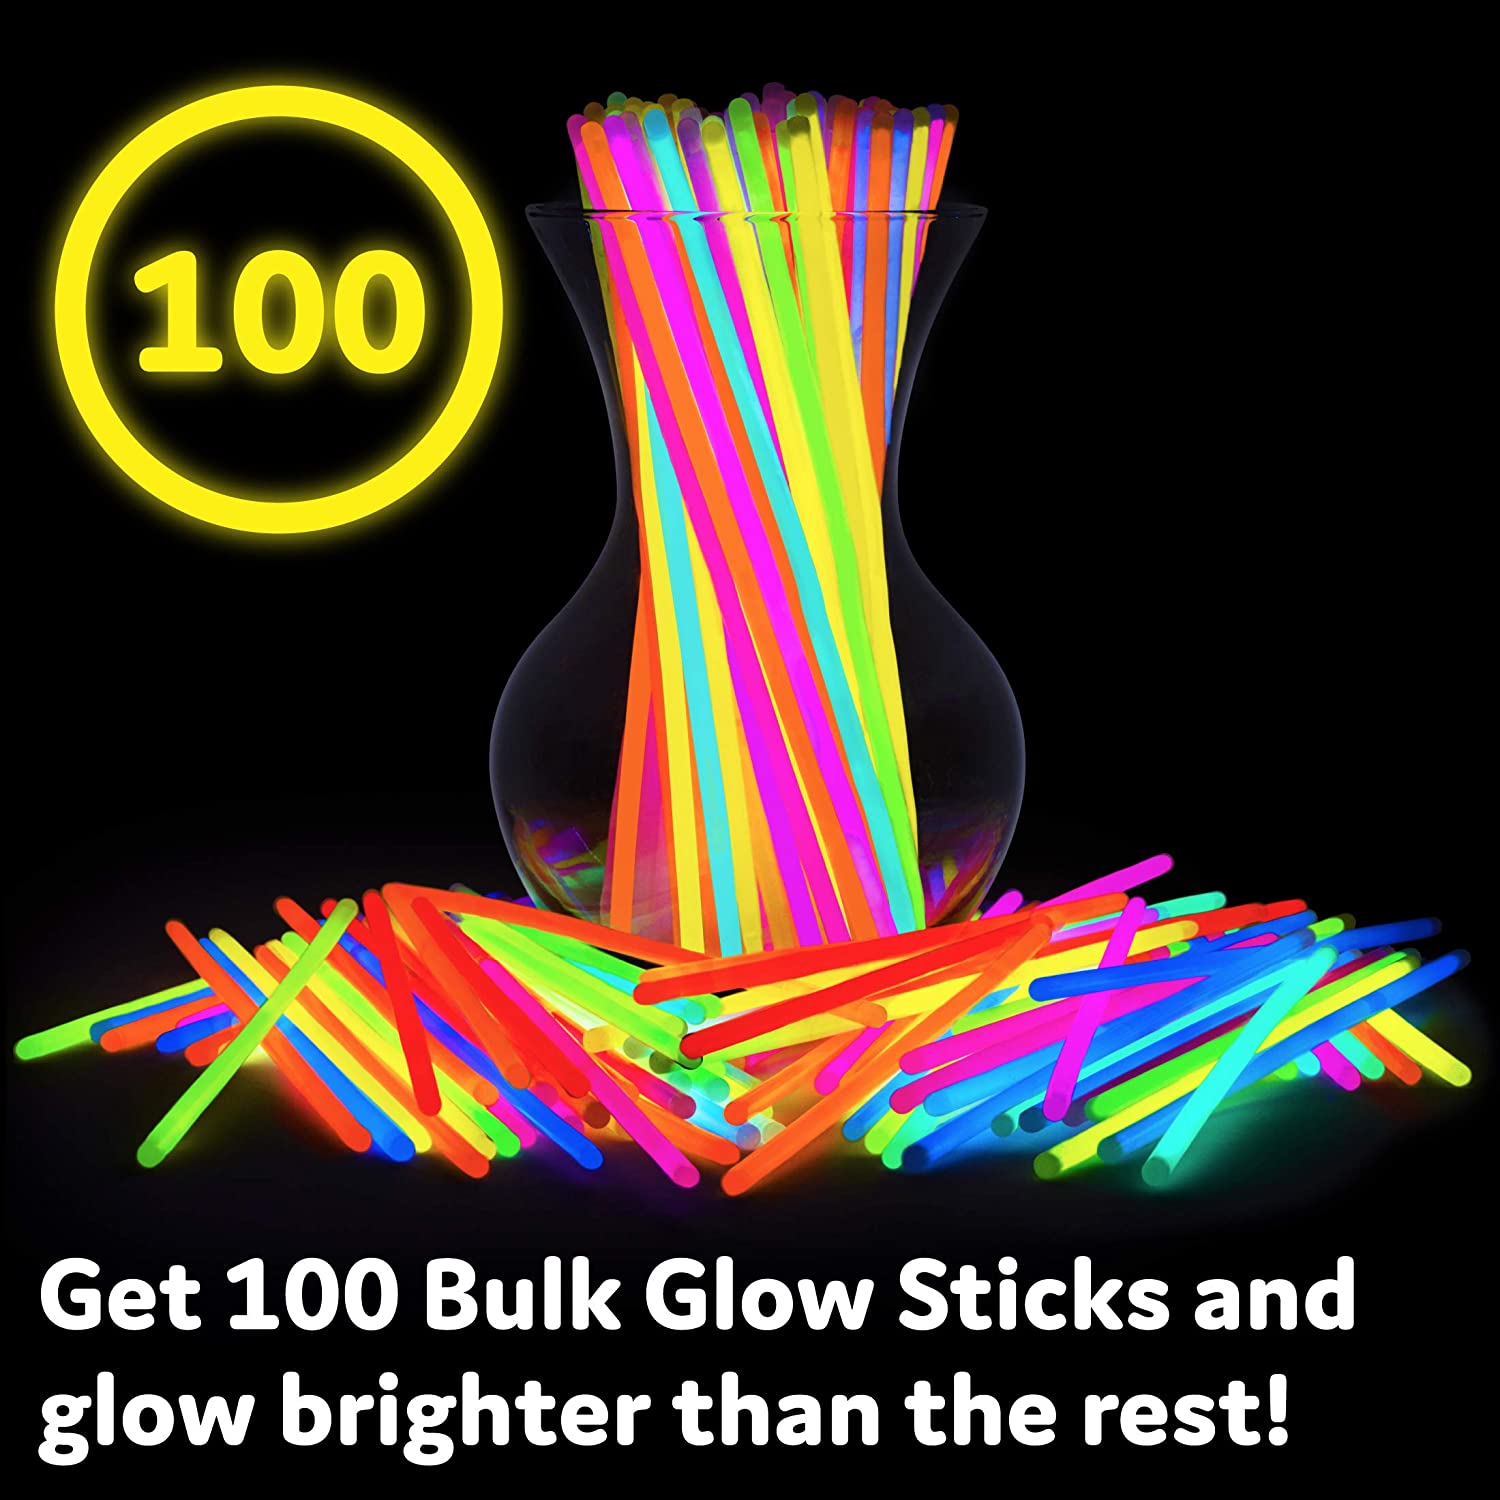 PartySticks Glow Sticks Party Supplies 100pk - 8 Inch Glow in the Dark Light Up Sticks Party Favors, Glow Party Decorations, Neon Party Glow Necklaces and Glow Bracelets with Connectors - image 4 of 7